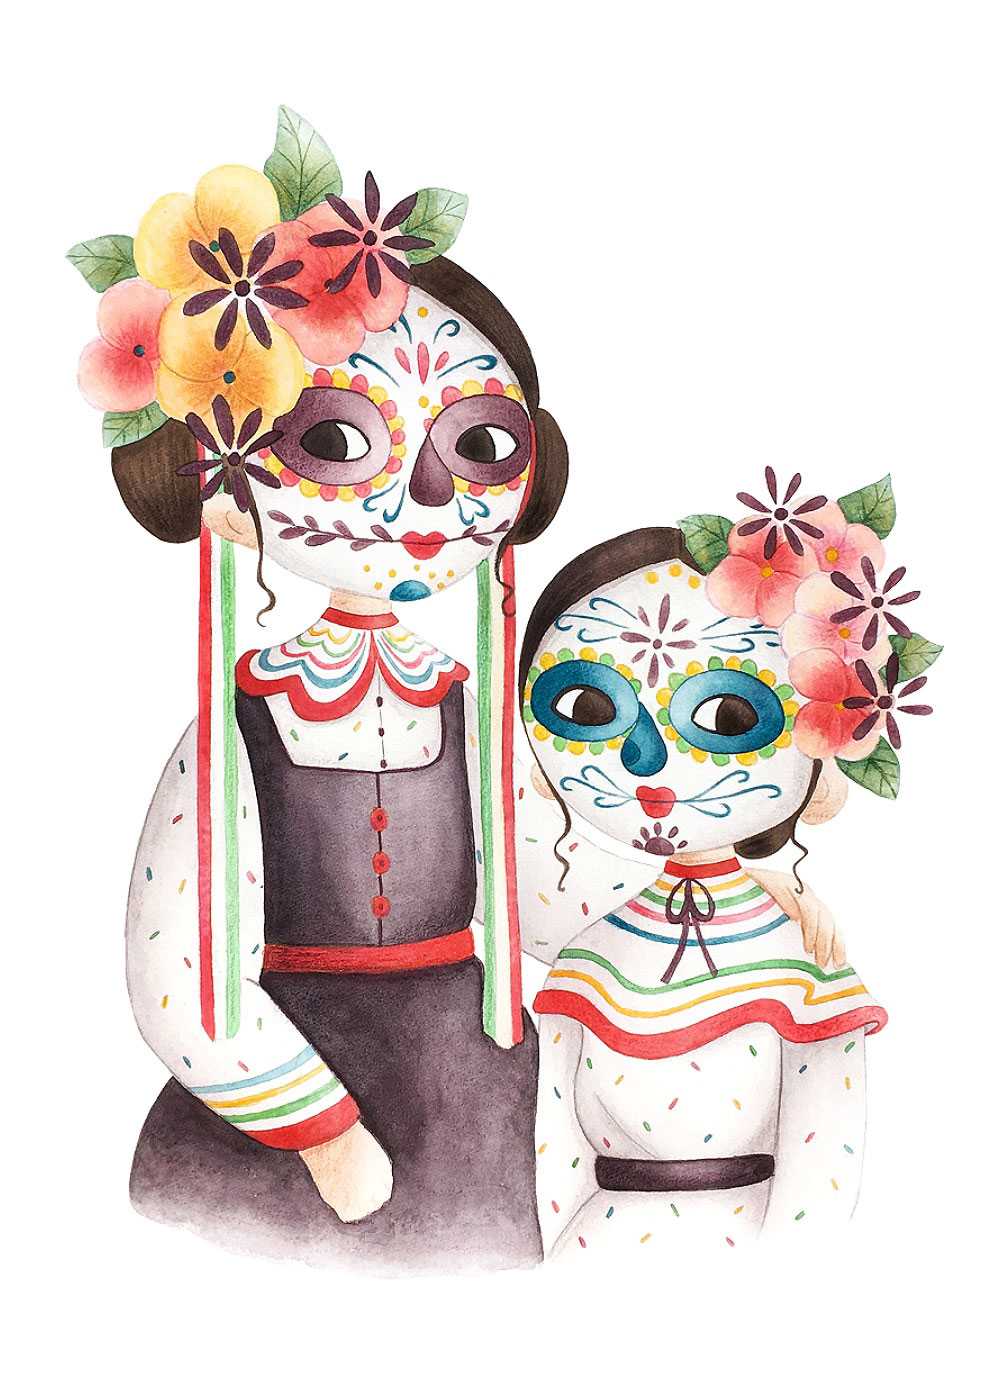 Two little girls with Dia de los muertos makeup and traditional costumes.